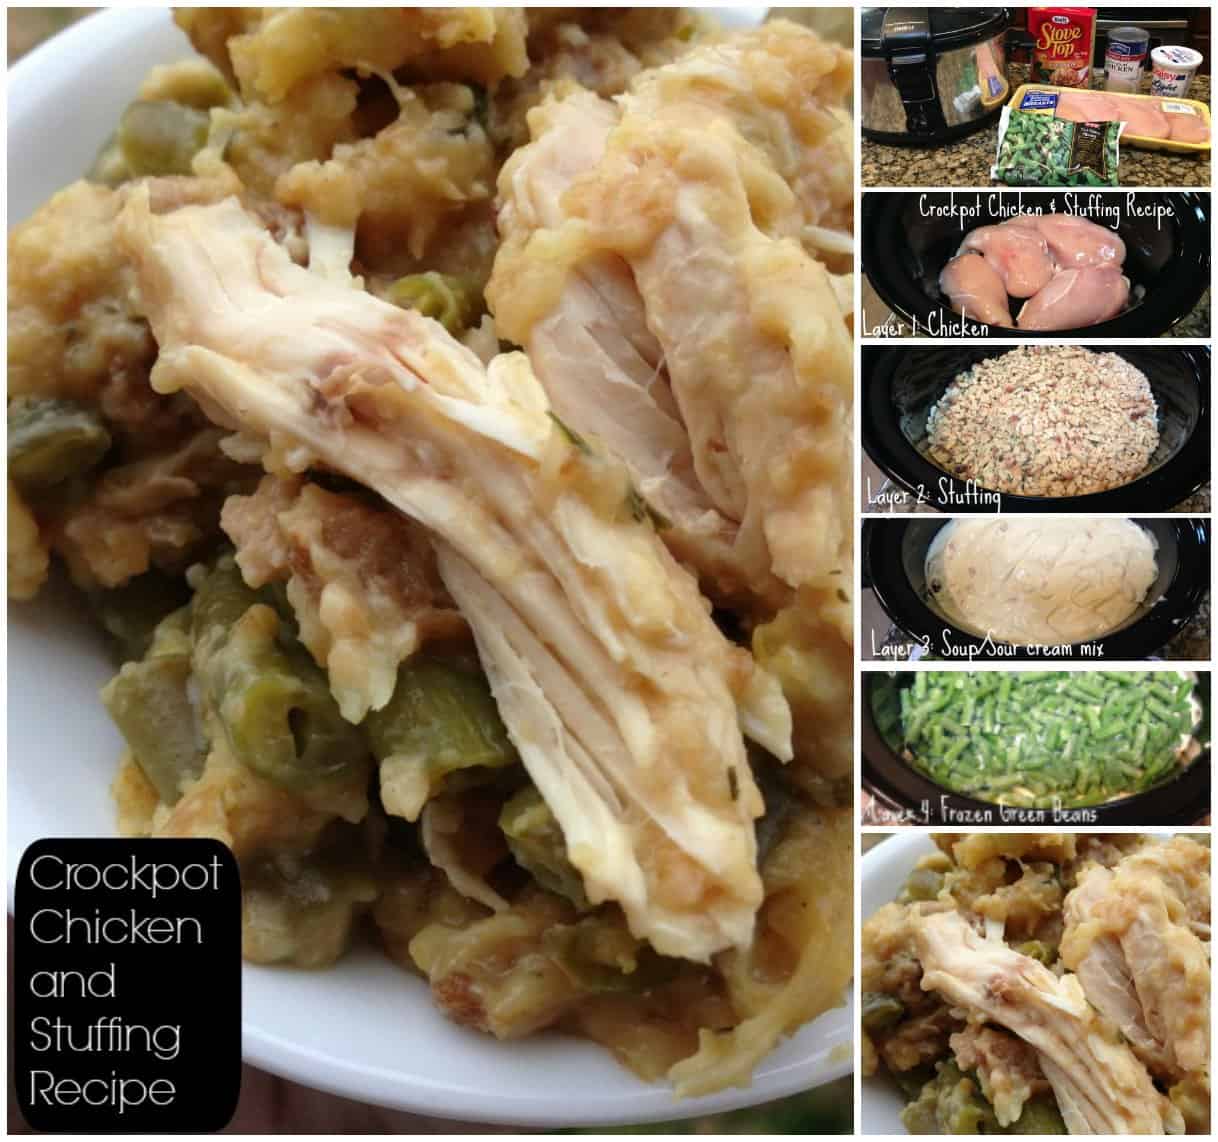 Crockpot Chicken And Stuffing Recipe Isavea2z Com,What To Write On A Sympathy Card For Loss